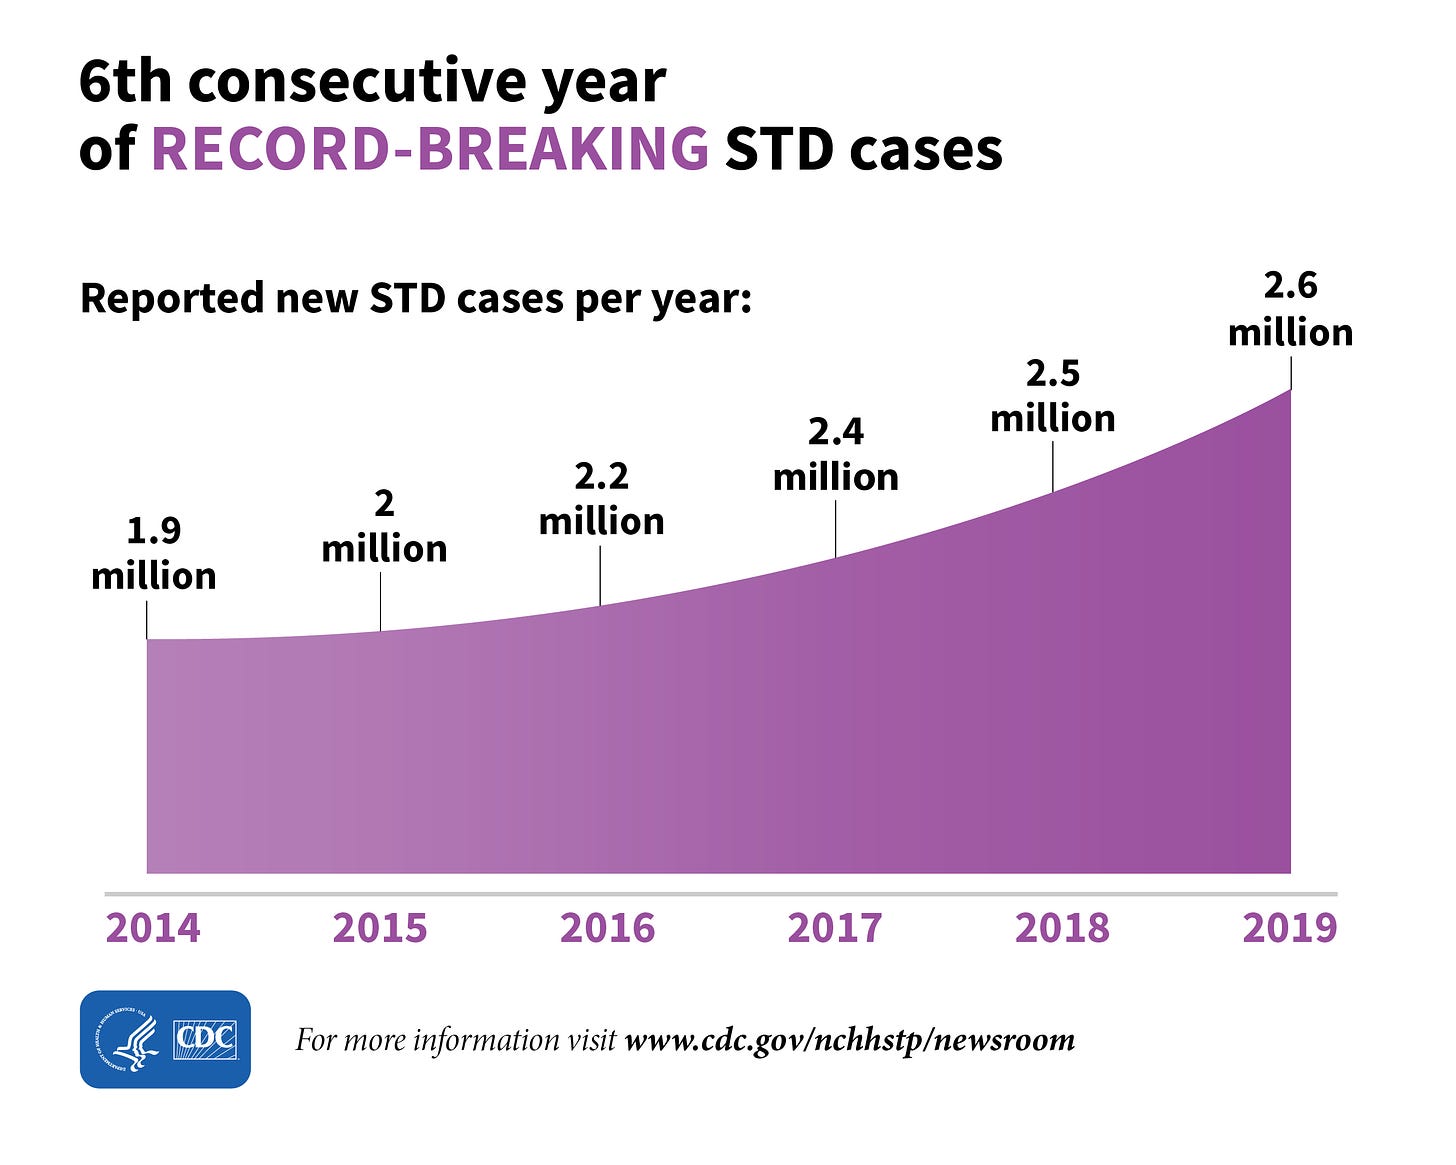 6th Consecutive Year of Record-breaking STD Cases  The line graph shows the reported new STD cases per year from 2014 to 2019 and that 2019 was the 6th consecutive year of record-breaking STD cases.  There were approximately 1.9 million reported new STD cases in 2014, 2 million in 2015, 2.2 million in 2016, 2.4 million in 2017, 2.5 million in 2018, and 2.6 million in 2019.